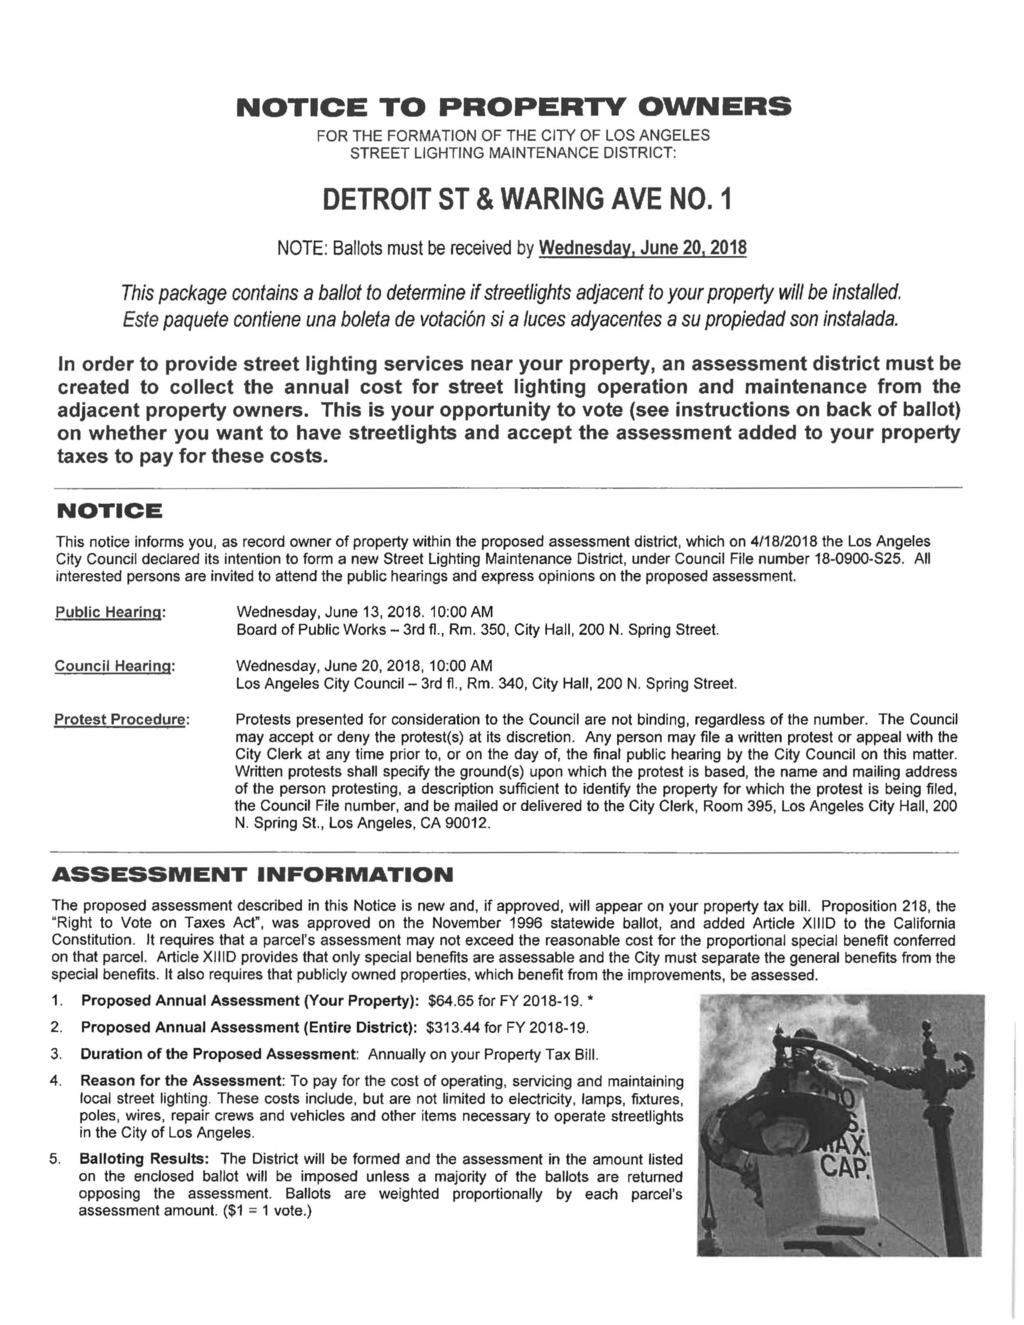 NOTICE TO PROPERTY OWNERS FOR THE FORMATION OF THE CITY OF LOS ANGELES STREET LIGHTING MAINTENANCE DISTRICT: DETROIT ST & WARING AVE NO.